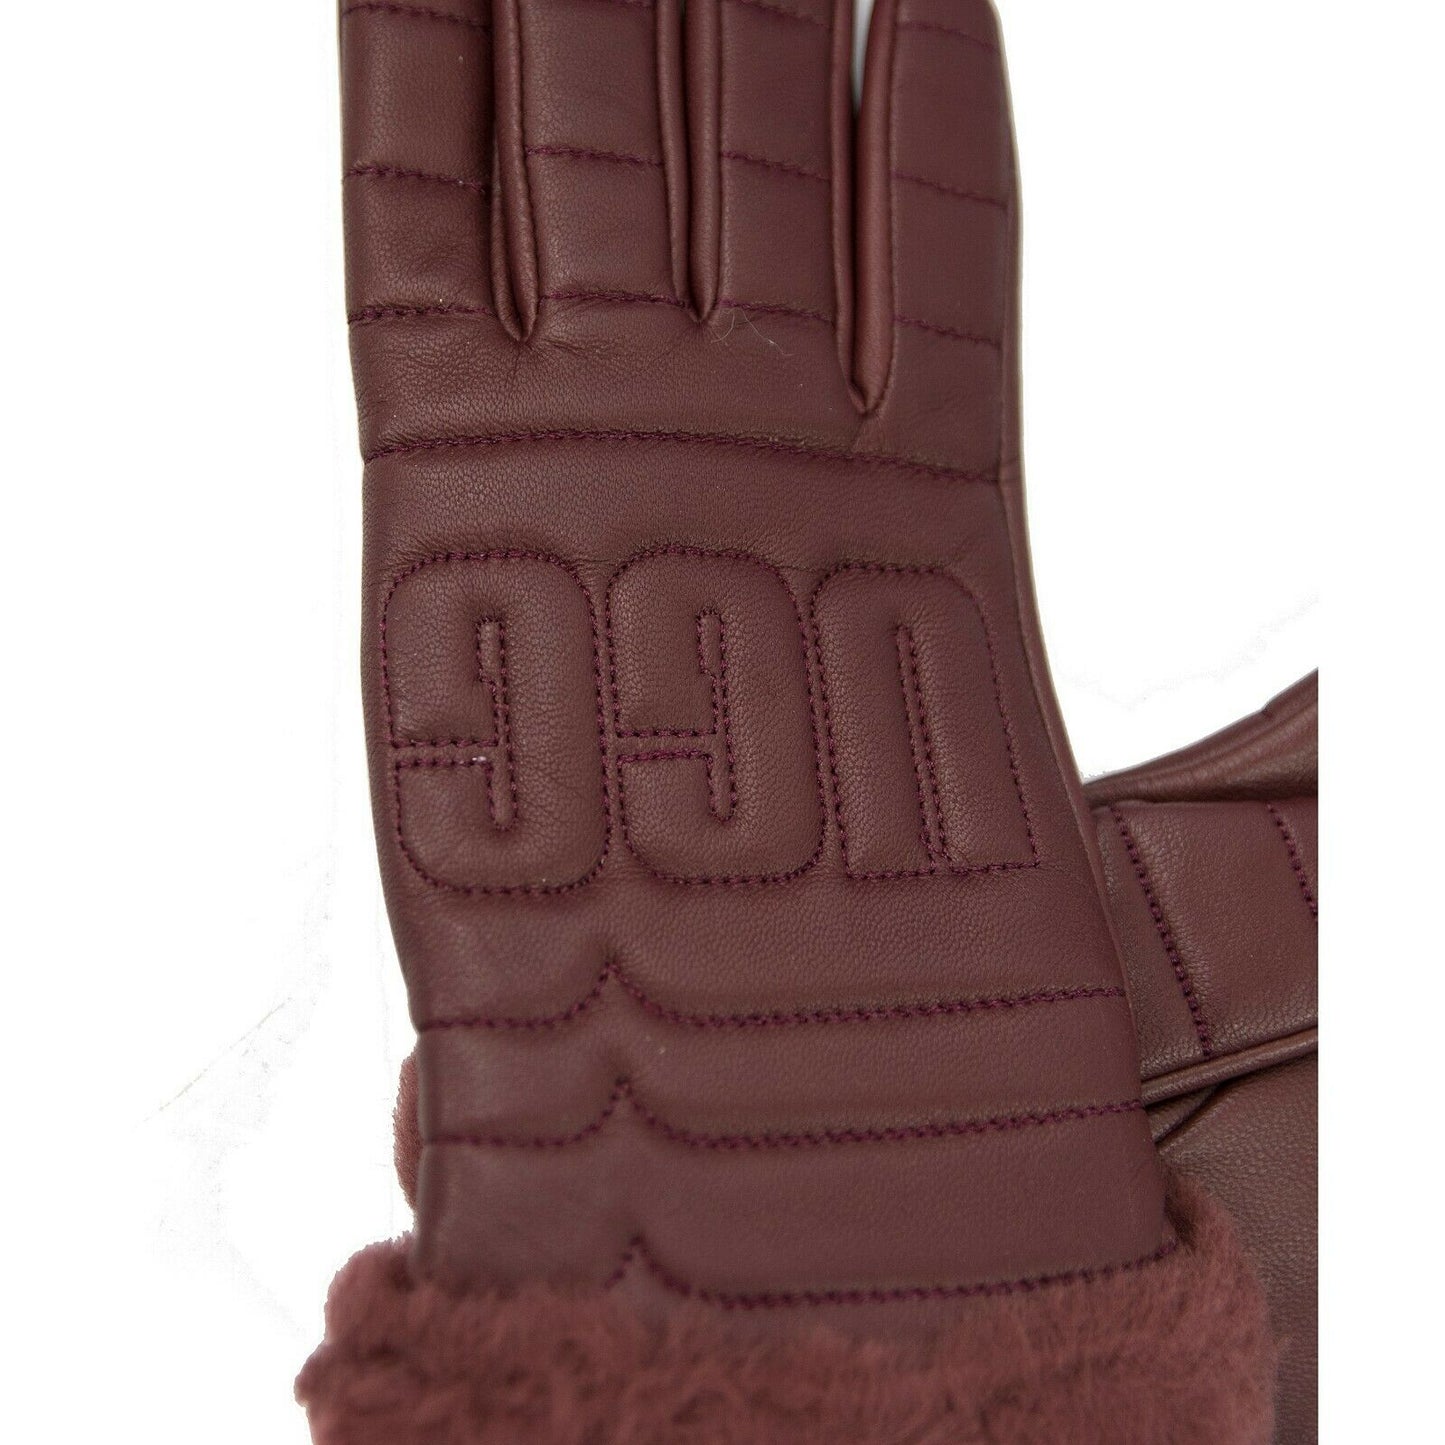 Ugg Burgundy Quilted Leather Conductive Tech Palm Shearling Fur Gloves Small